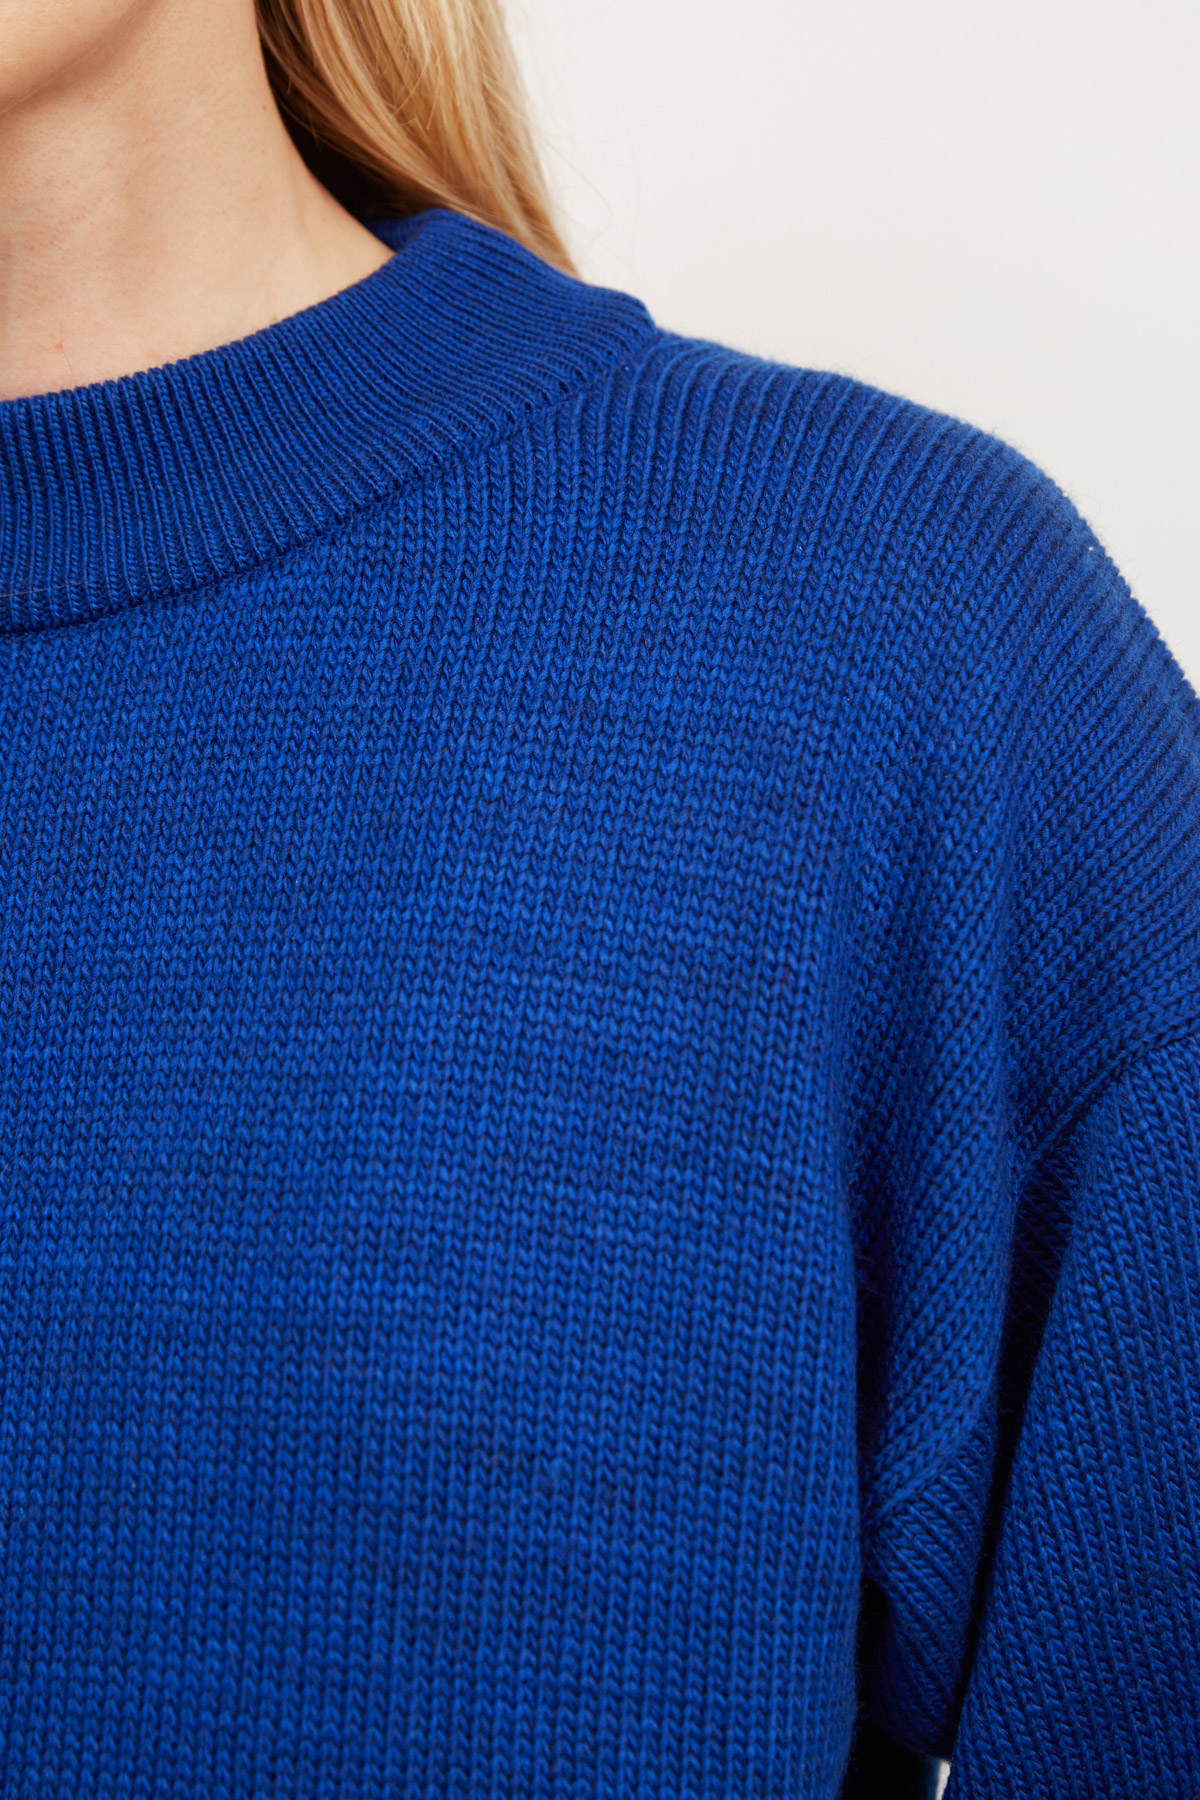 Electric blue knitted sweater, photo 3